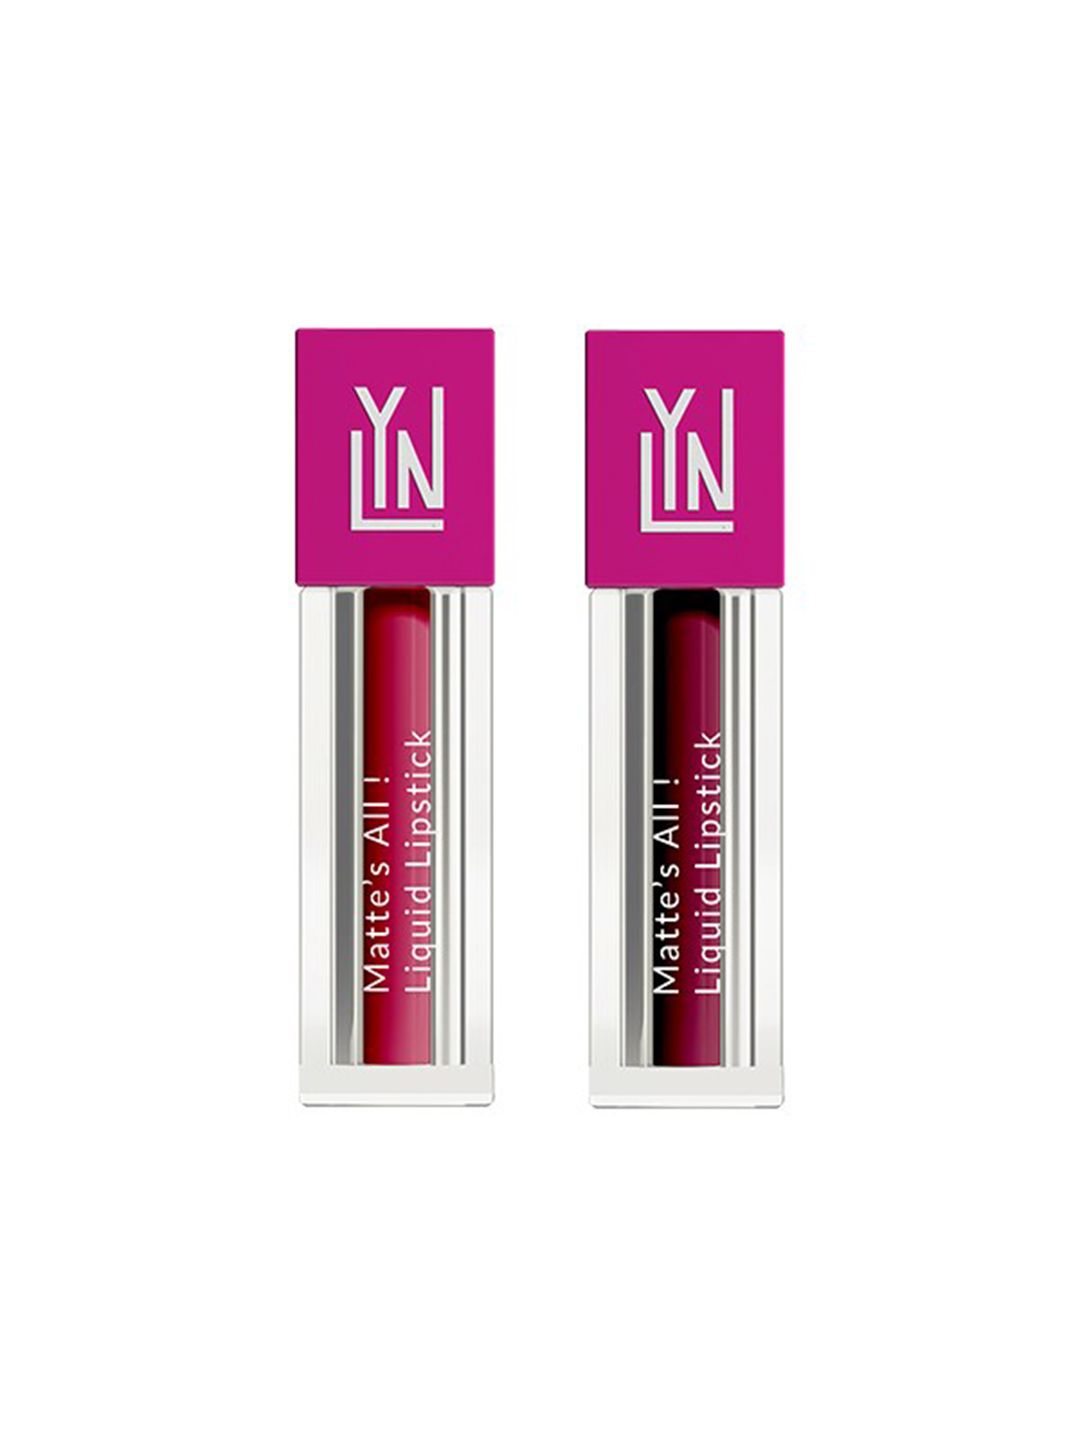 LYN LIVE YOUR NOW Set Of 2 Matte Liquid Lipstick Pink Lush & Berry Crush - 2ml Price in India